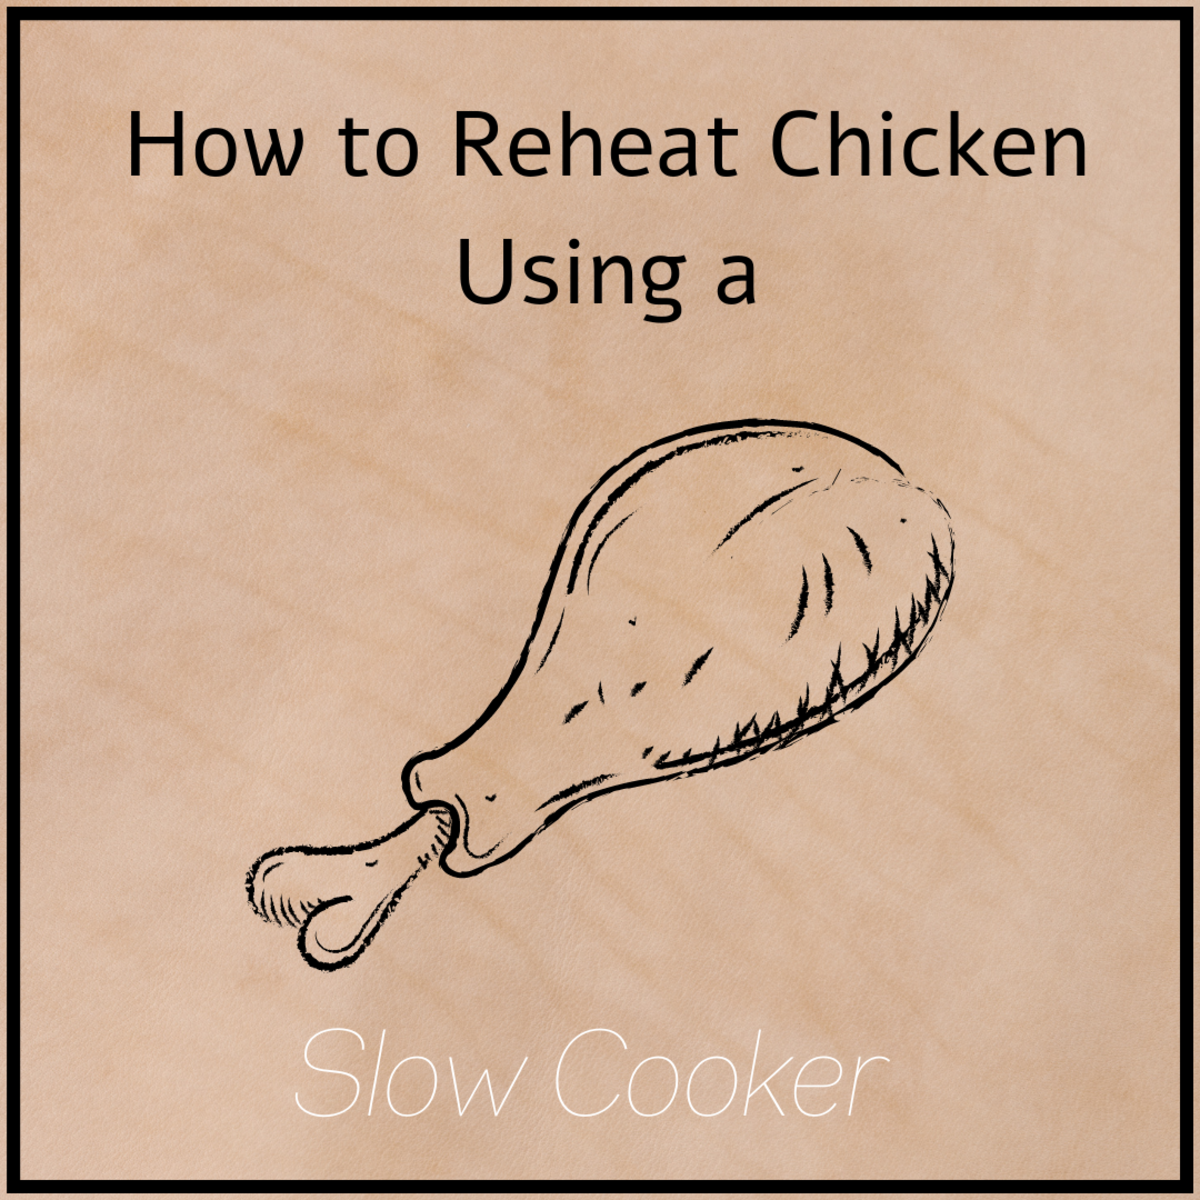 Reheating Chicken Cooked in a Slow Cooker